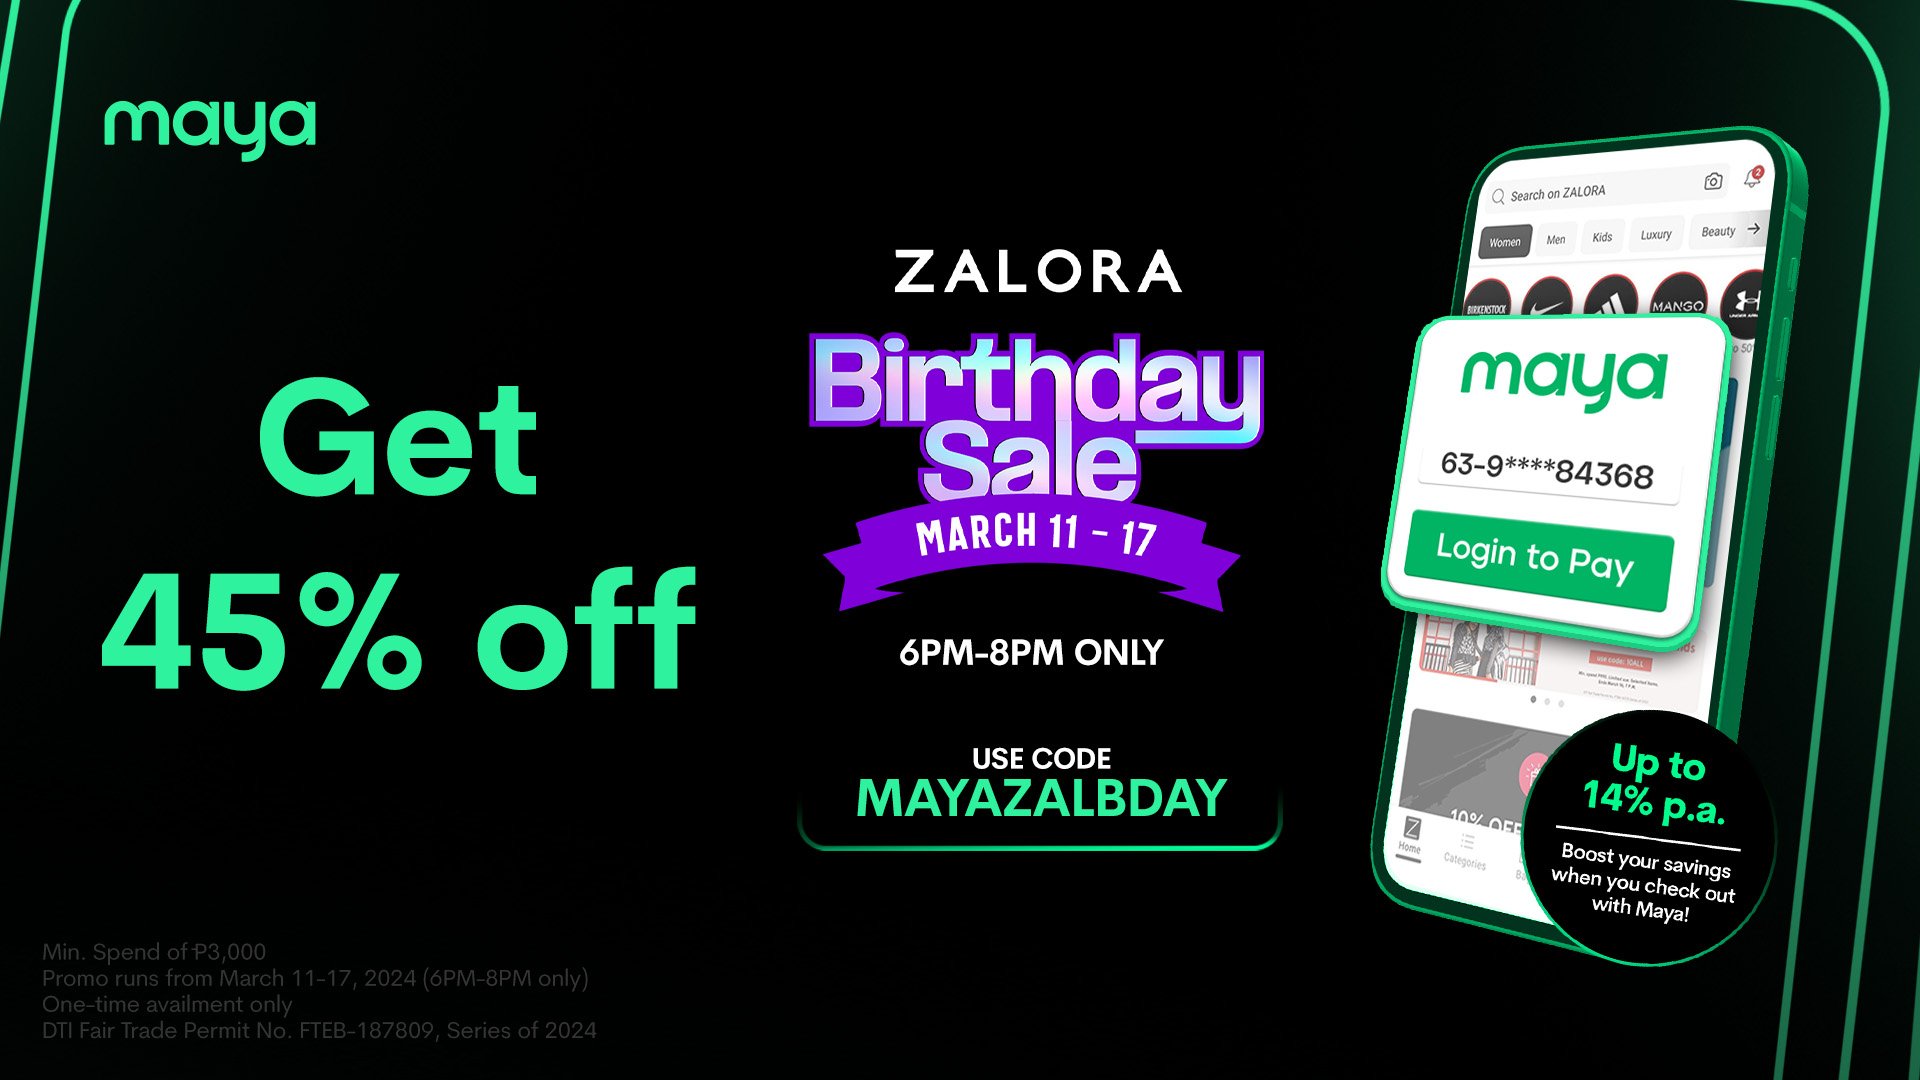 Get 45% off when you pay with Maya on ZALORA's 12th Birthday Sale!